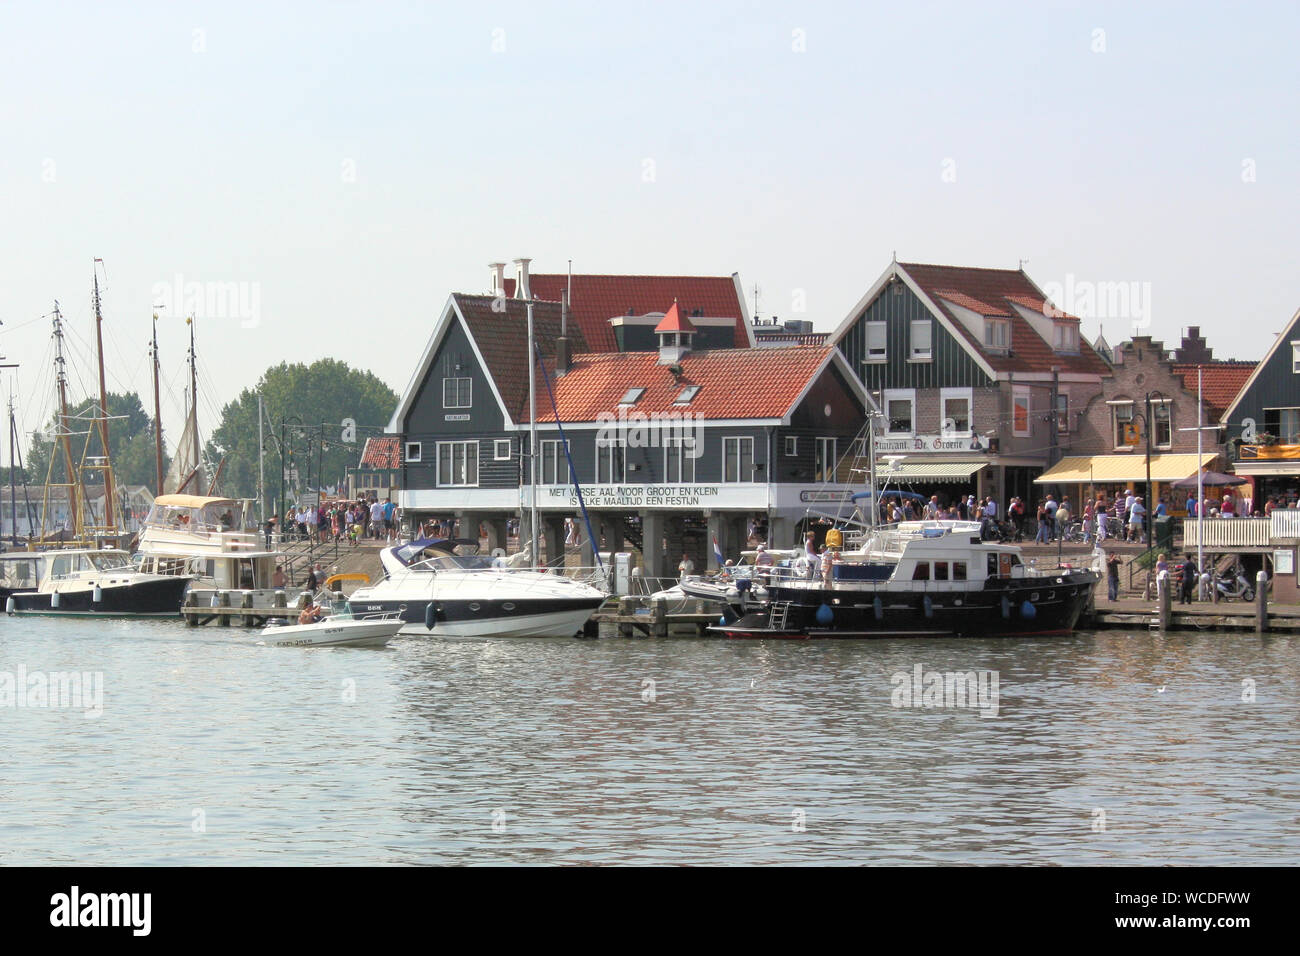 The Volendam fisherman village is well-preserved with piers, boats and little houses, restaurants, souvenir shops and photo studios. Stock Photo